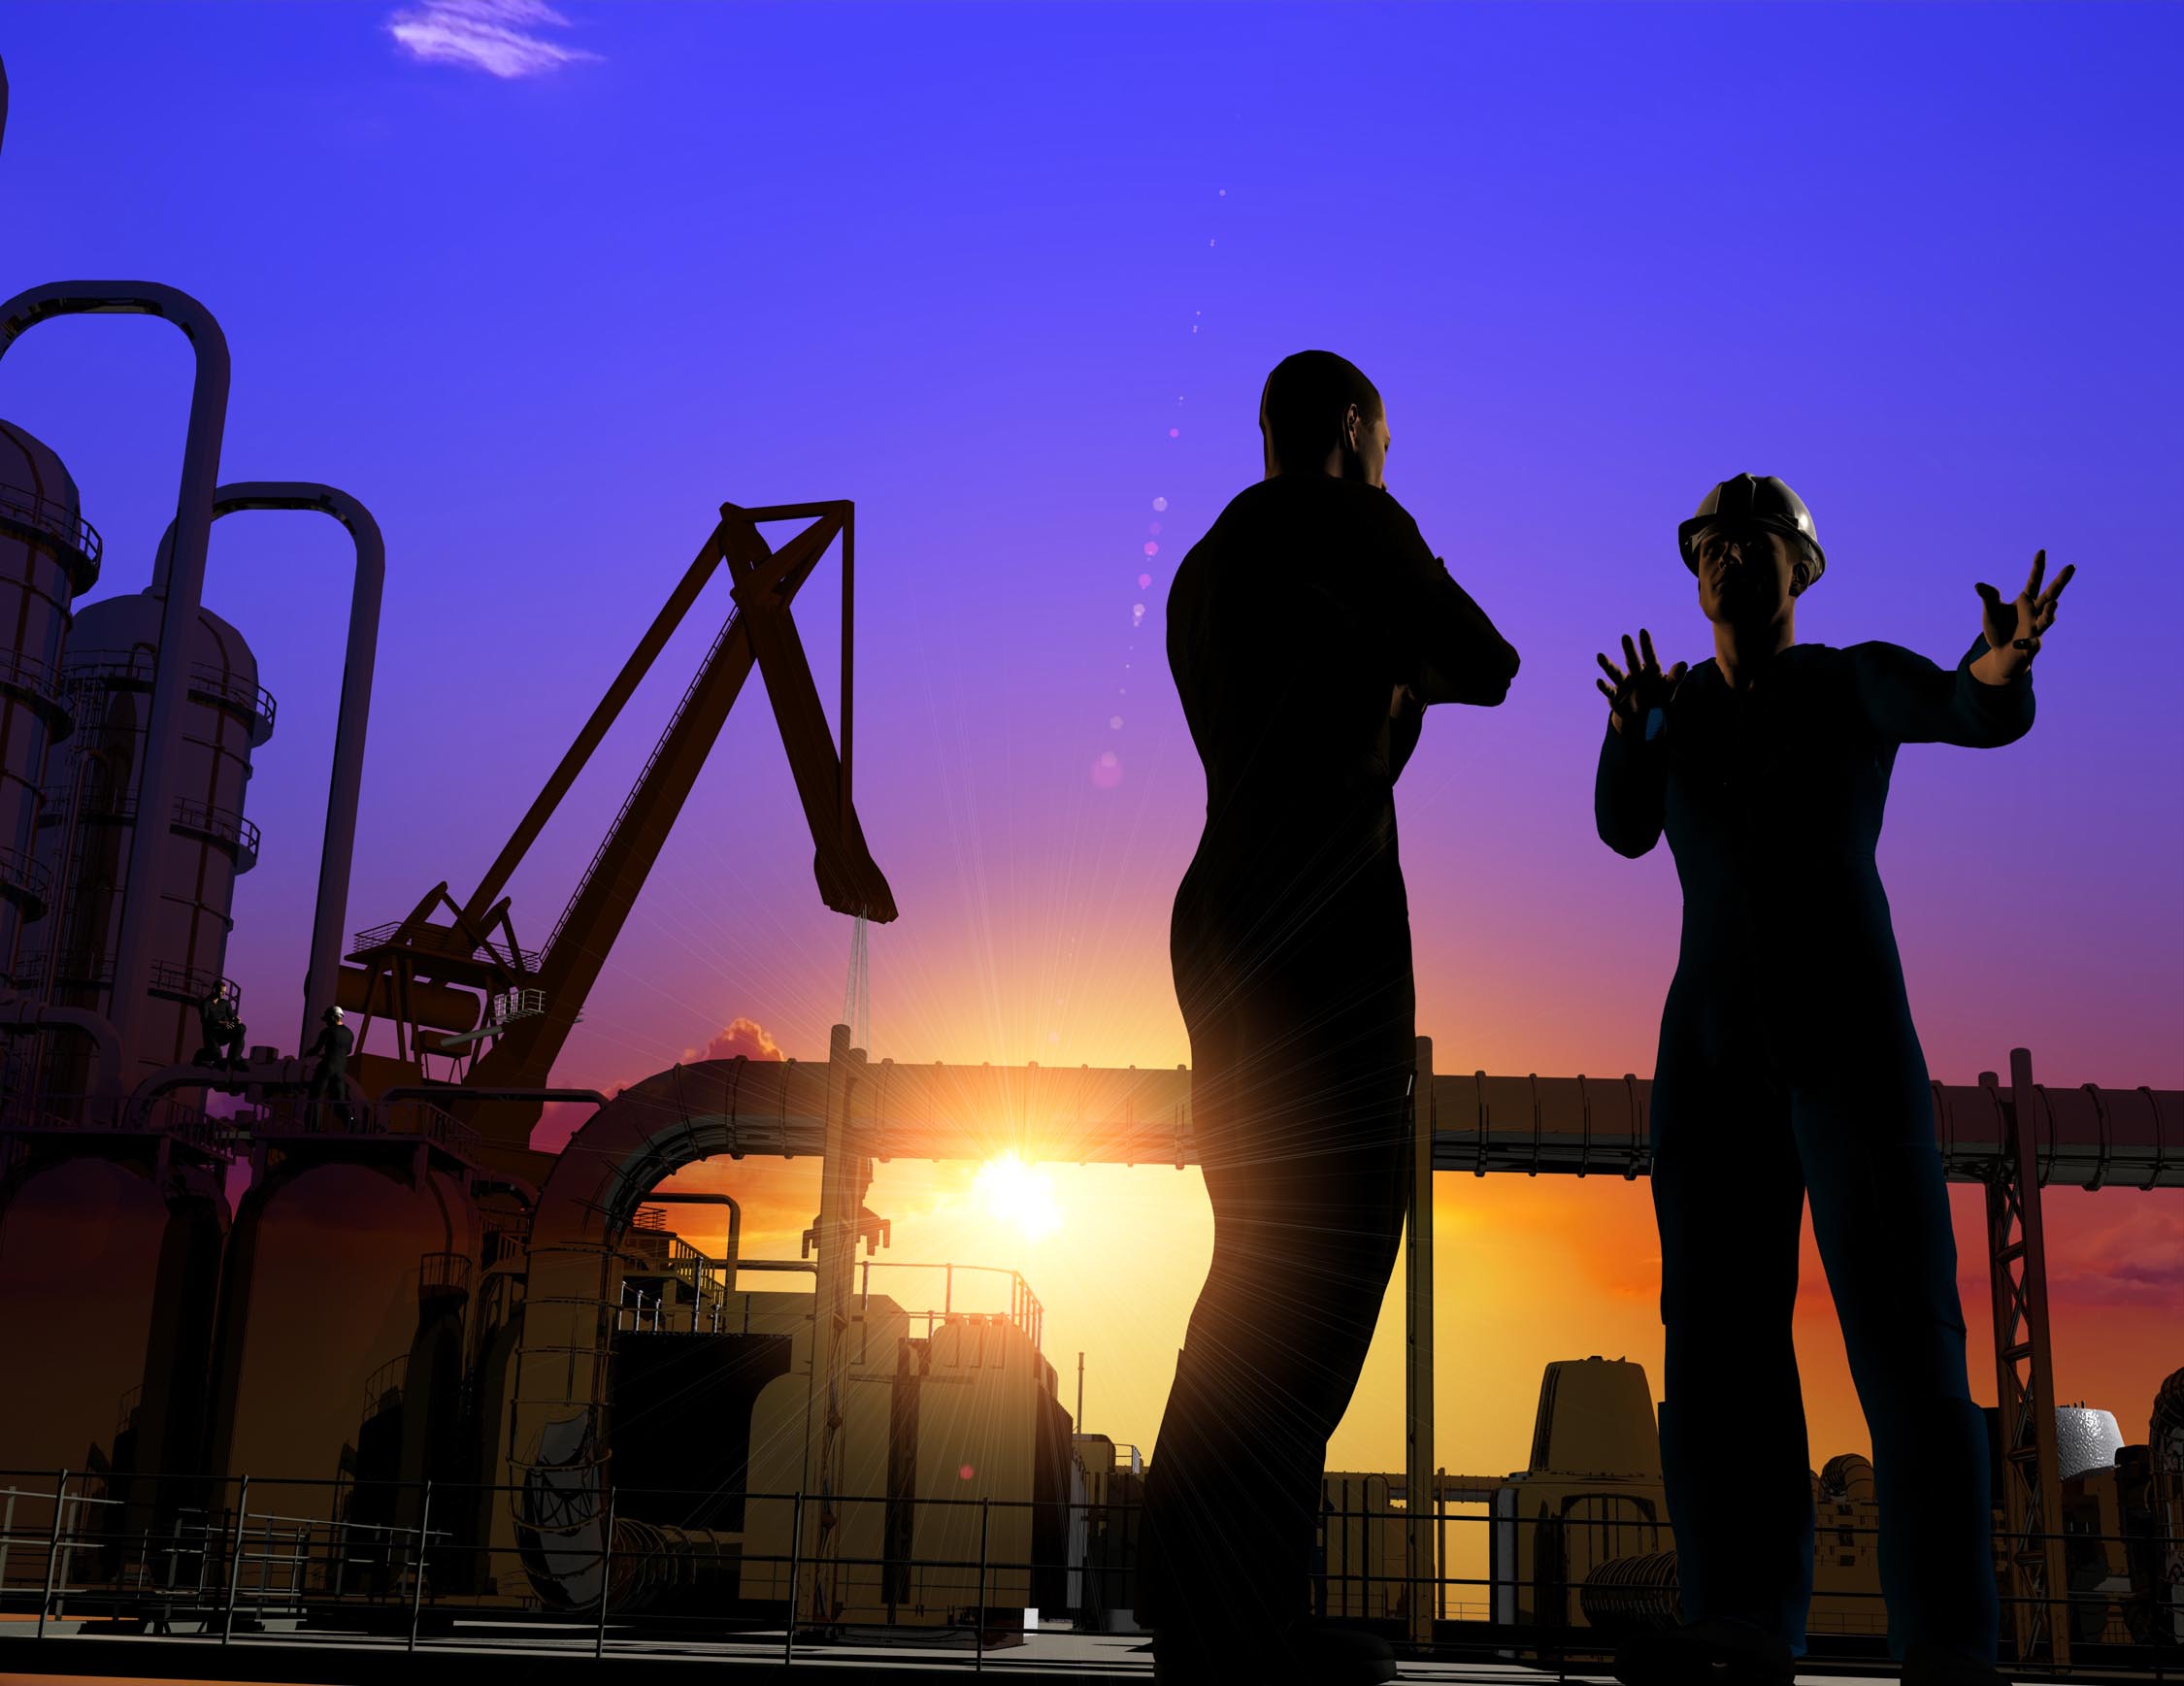 Civil engineers on a job sight and backlit by the sunset